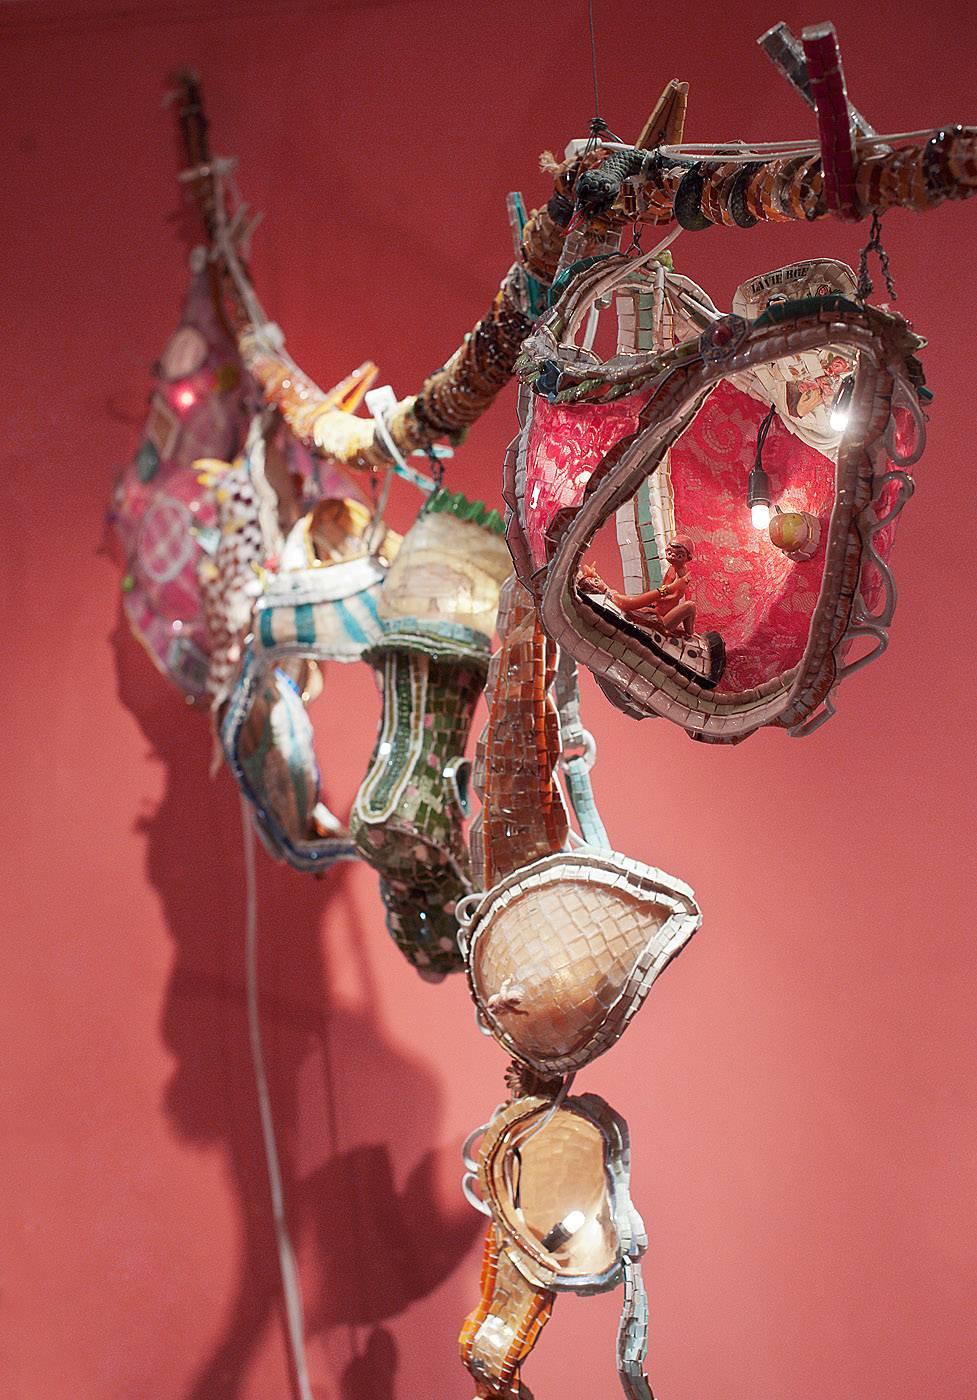 Mosaic sculpture, installation, rope, laundry, silicon, glass, tableware, lighting system.

Exhibition :
1993 to 1997 Callu-Me´rite Gallery, Paris
1994: Solo Show Galerie Callu-Me´rite, Paris
1999: Le´onardo Gallery, Paris
2000: Art Paris, Carrousel